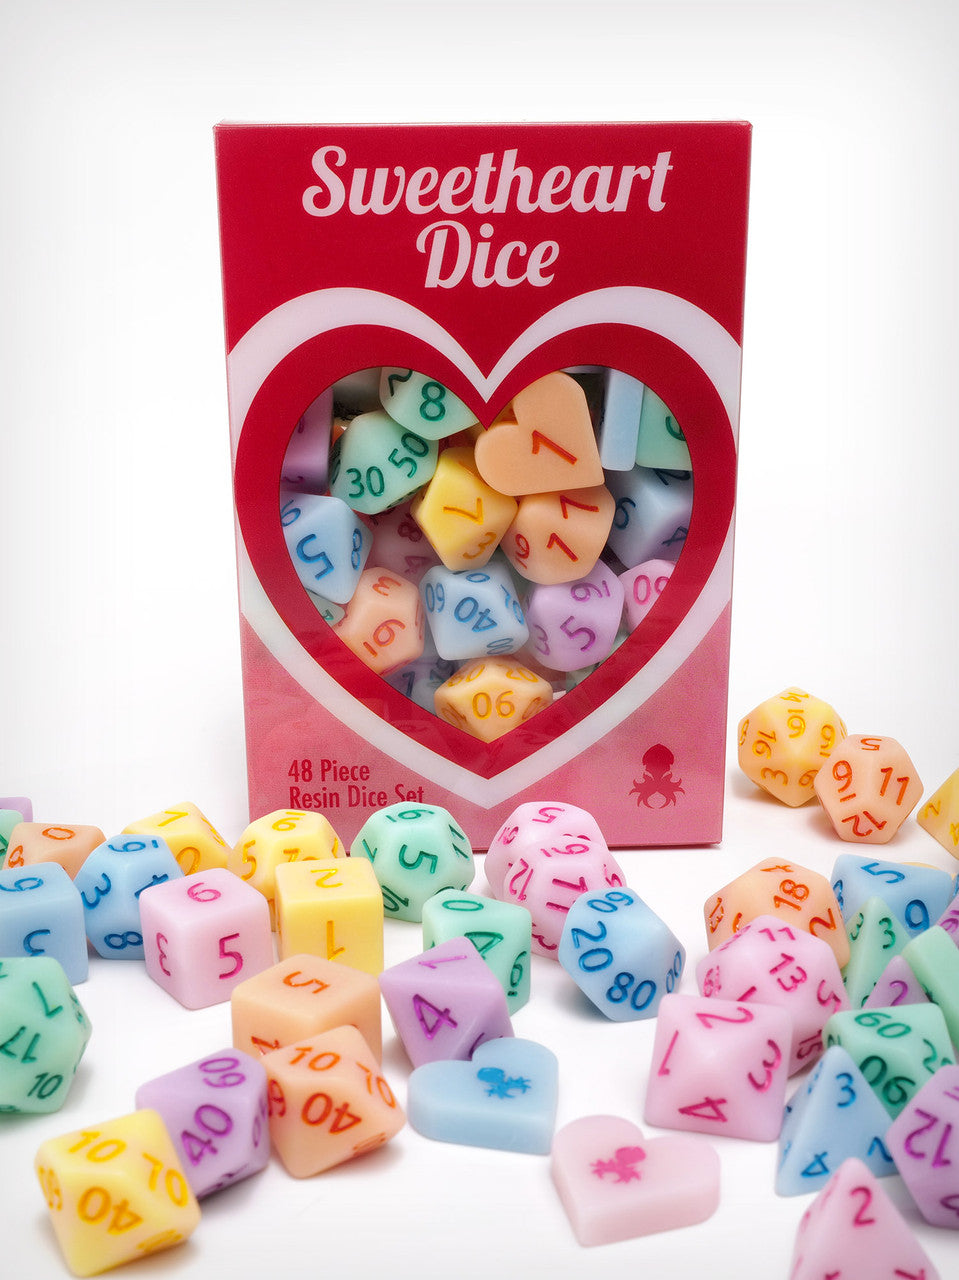 Be My Valentine "Sweetheart Dice" 48 Piece Resin Set